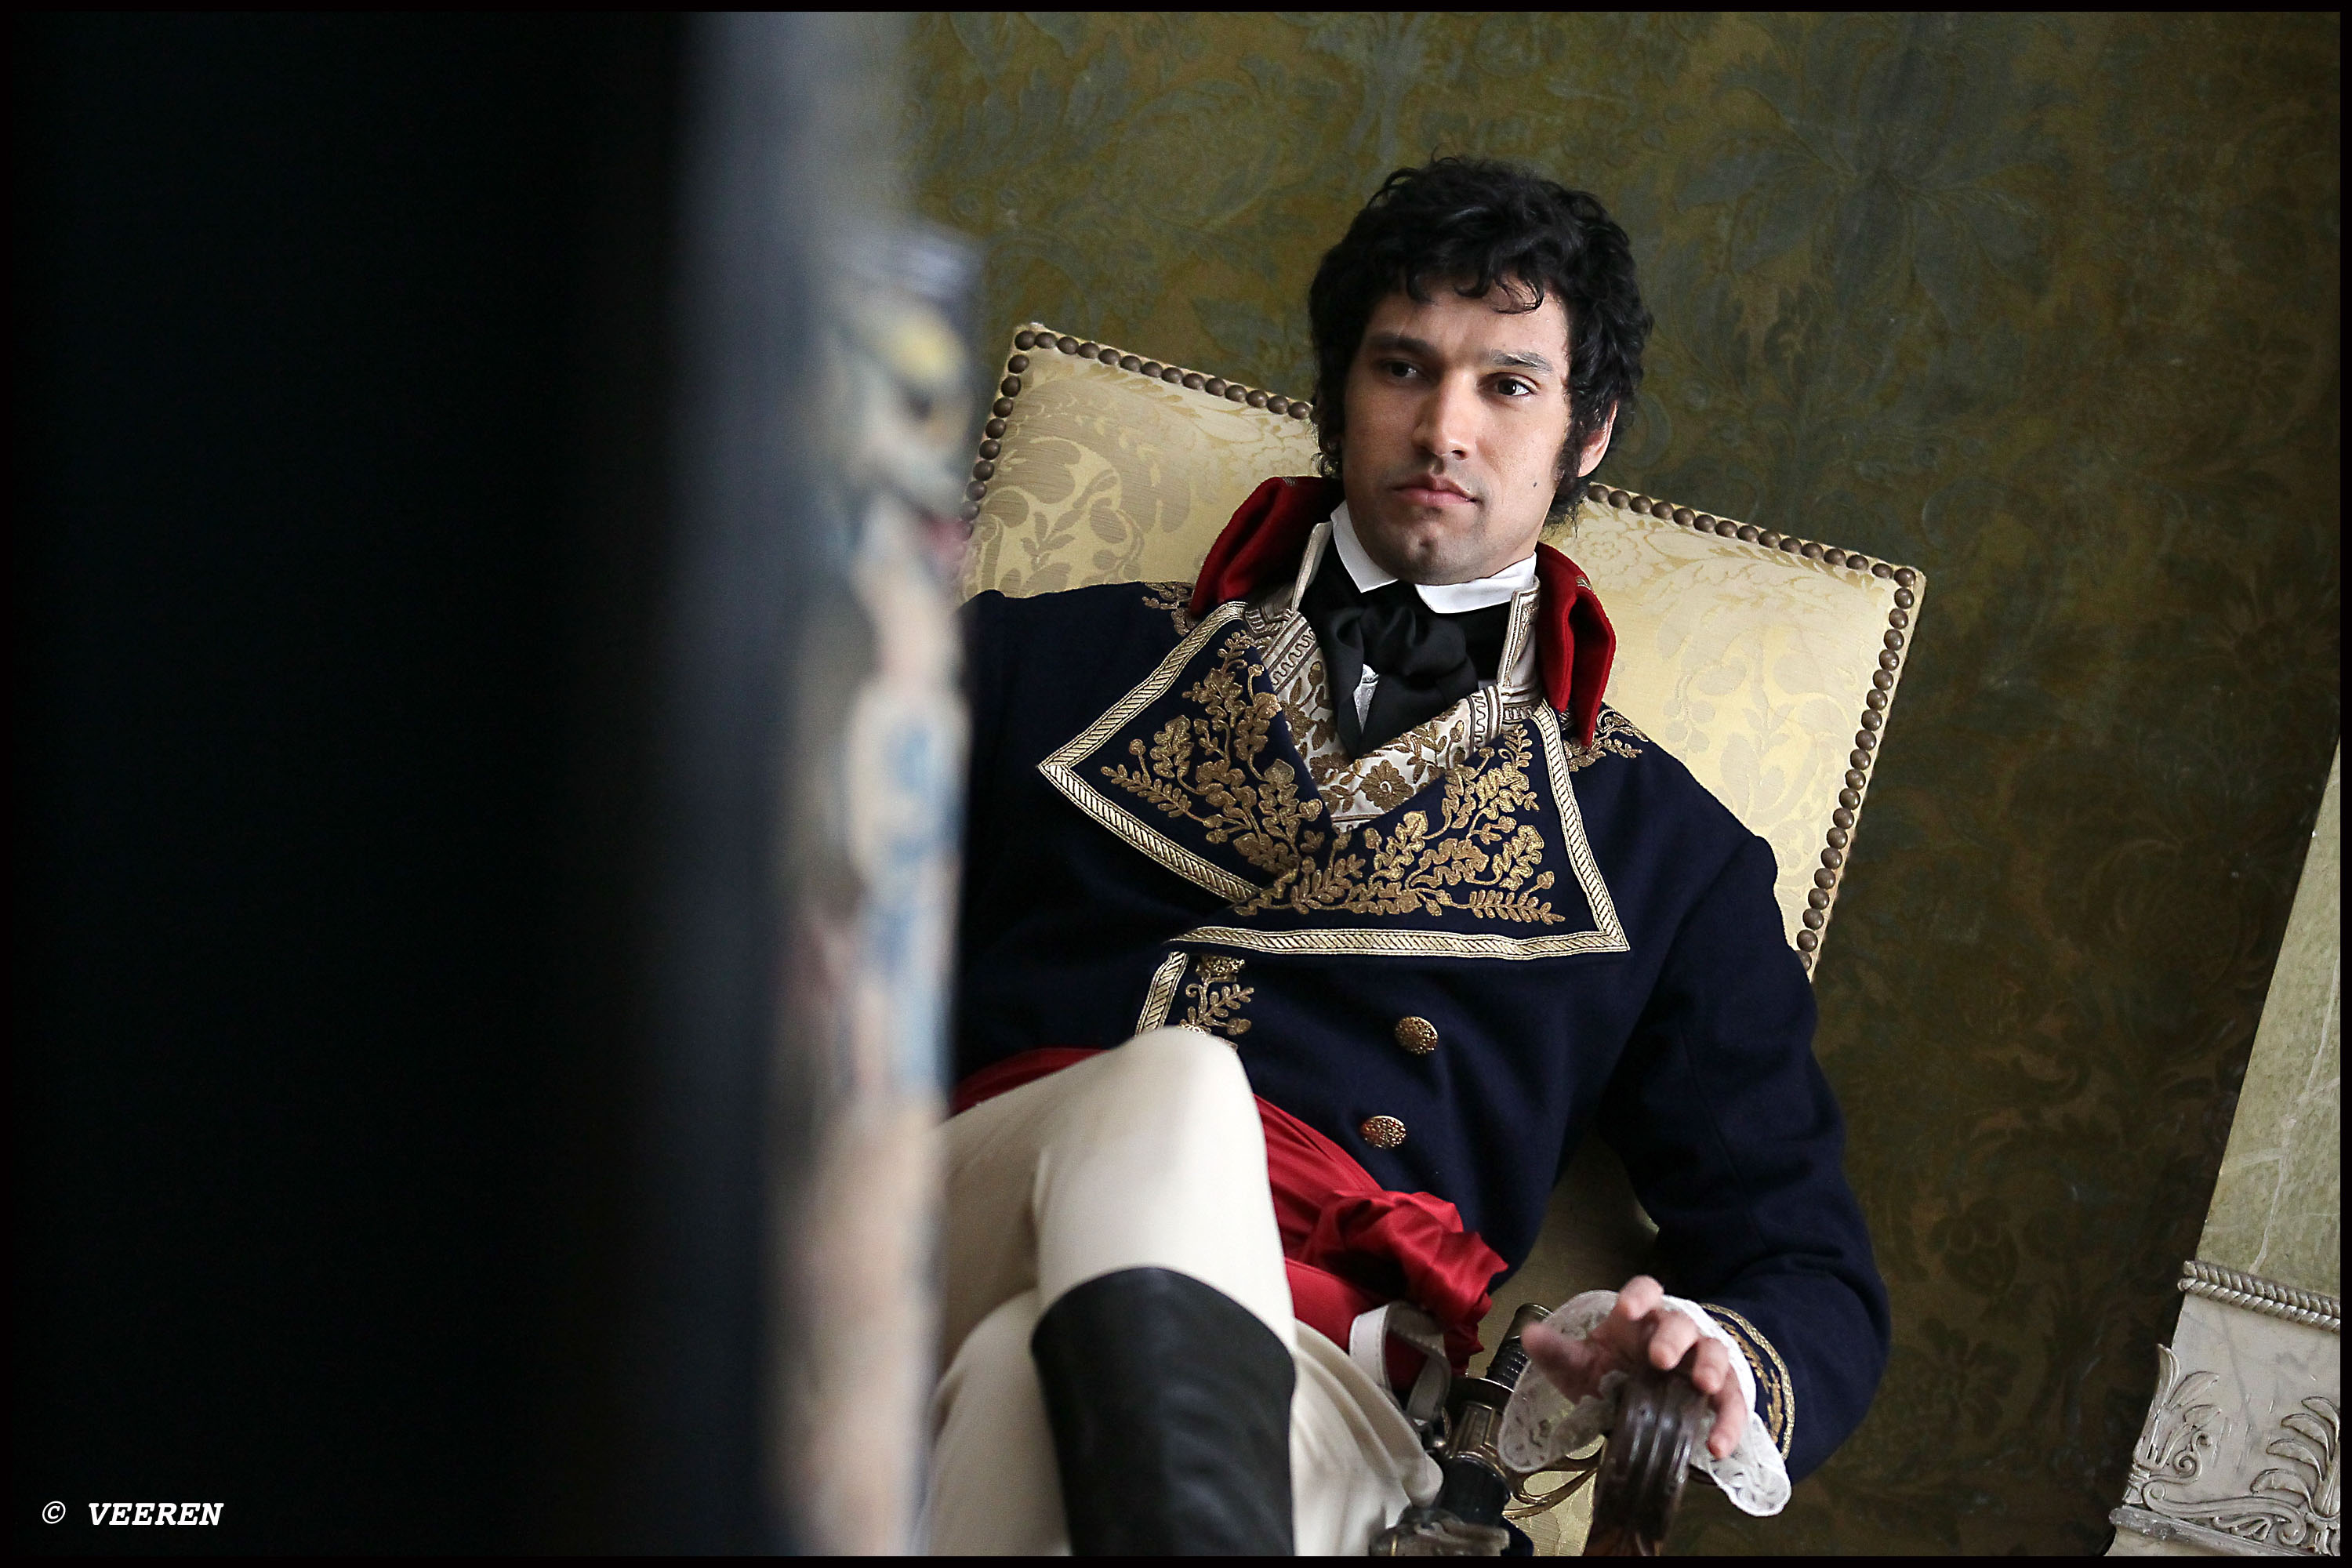 Stany COPPET as General RIGAUD, in Toussaint Louverture directed by Philippe Niang.